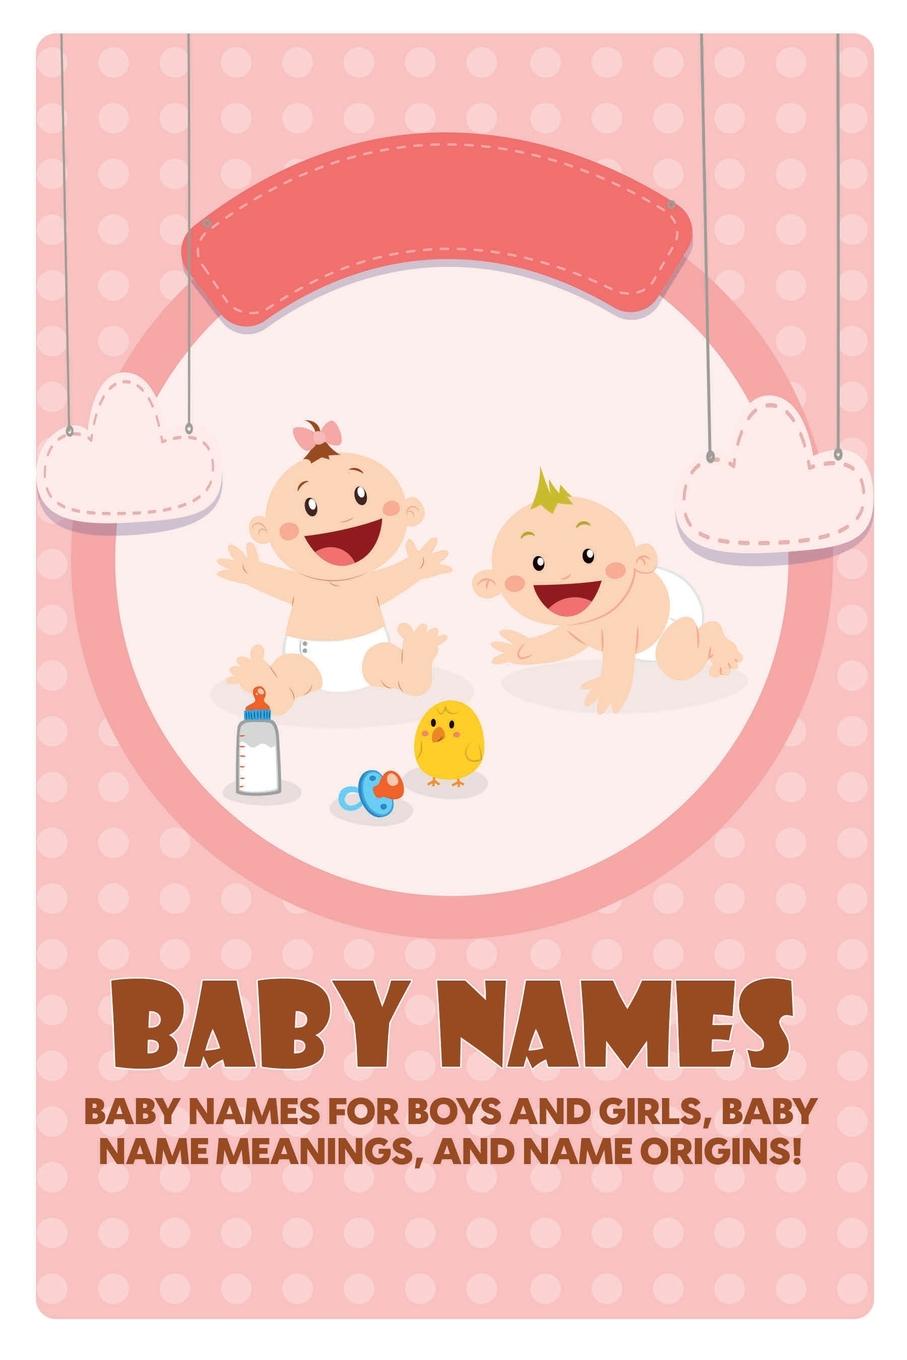 Baby Names. Baby Names for Boys and Girls, Baby Name Meanings, and Name Origins!